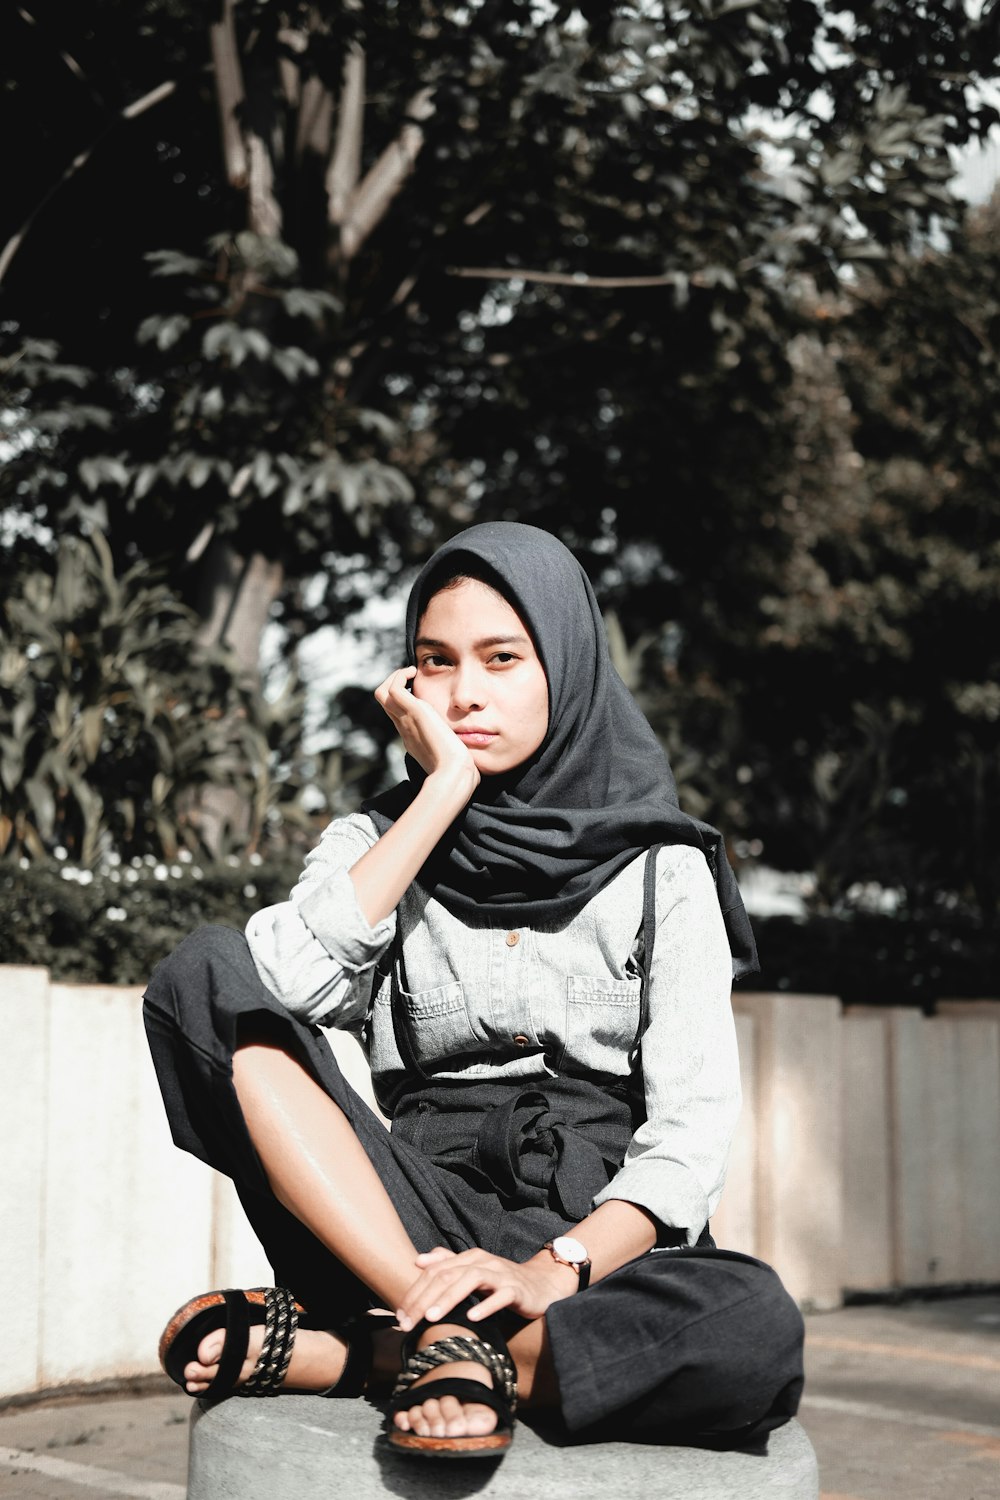 woman in black hijab and gray long sleeve shirt sitting on concrete bench